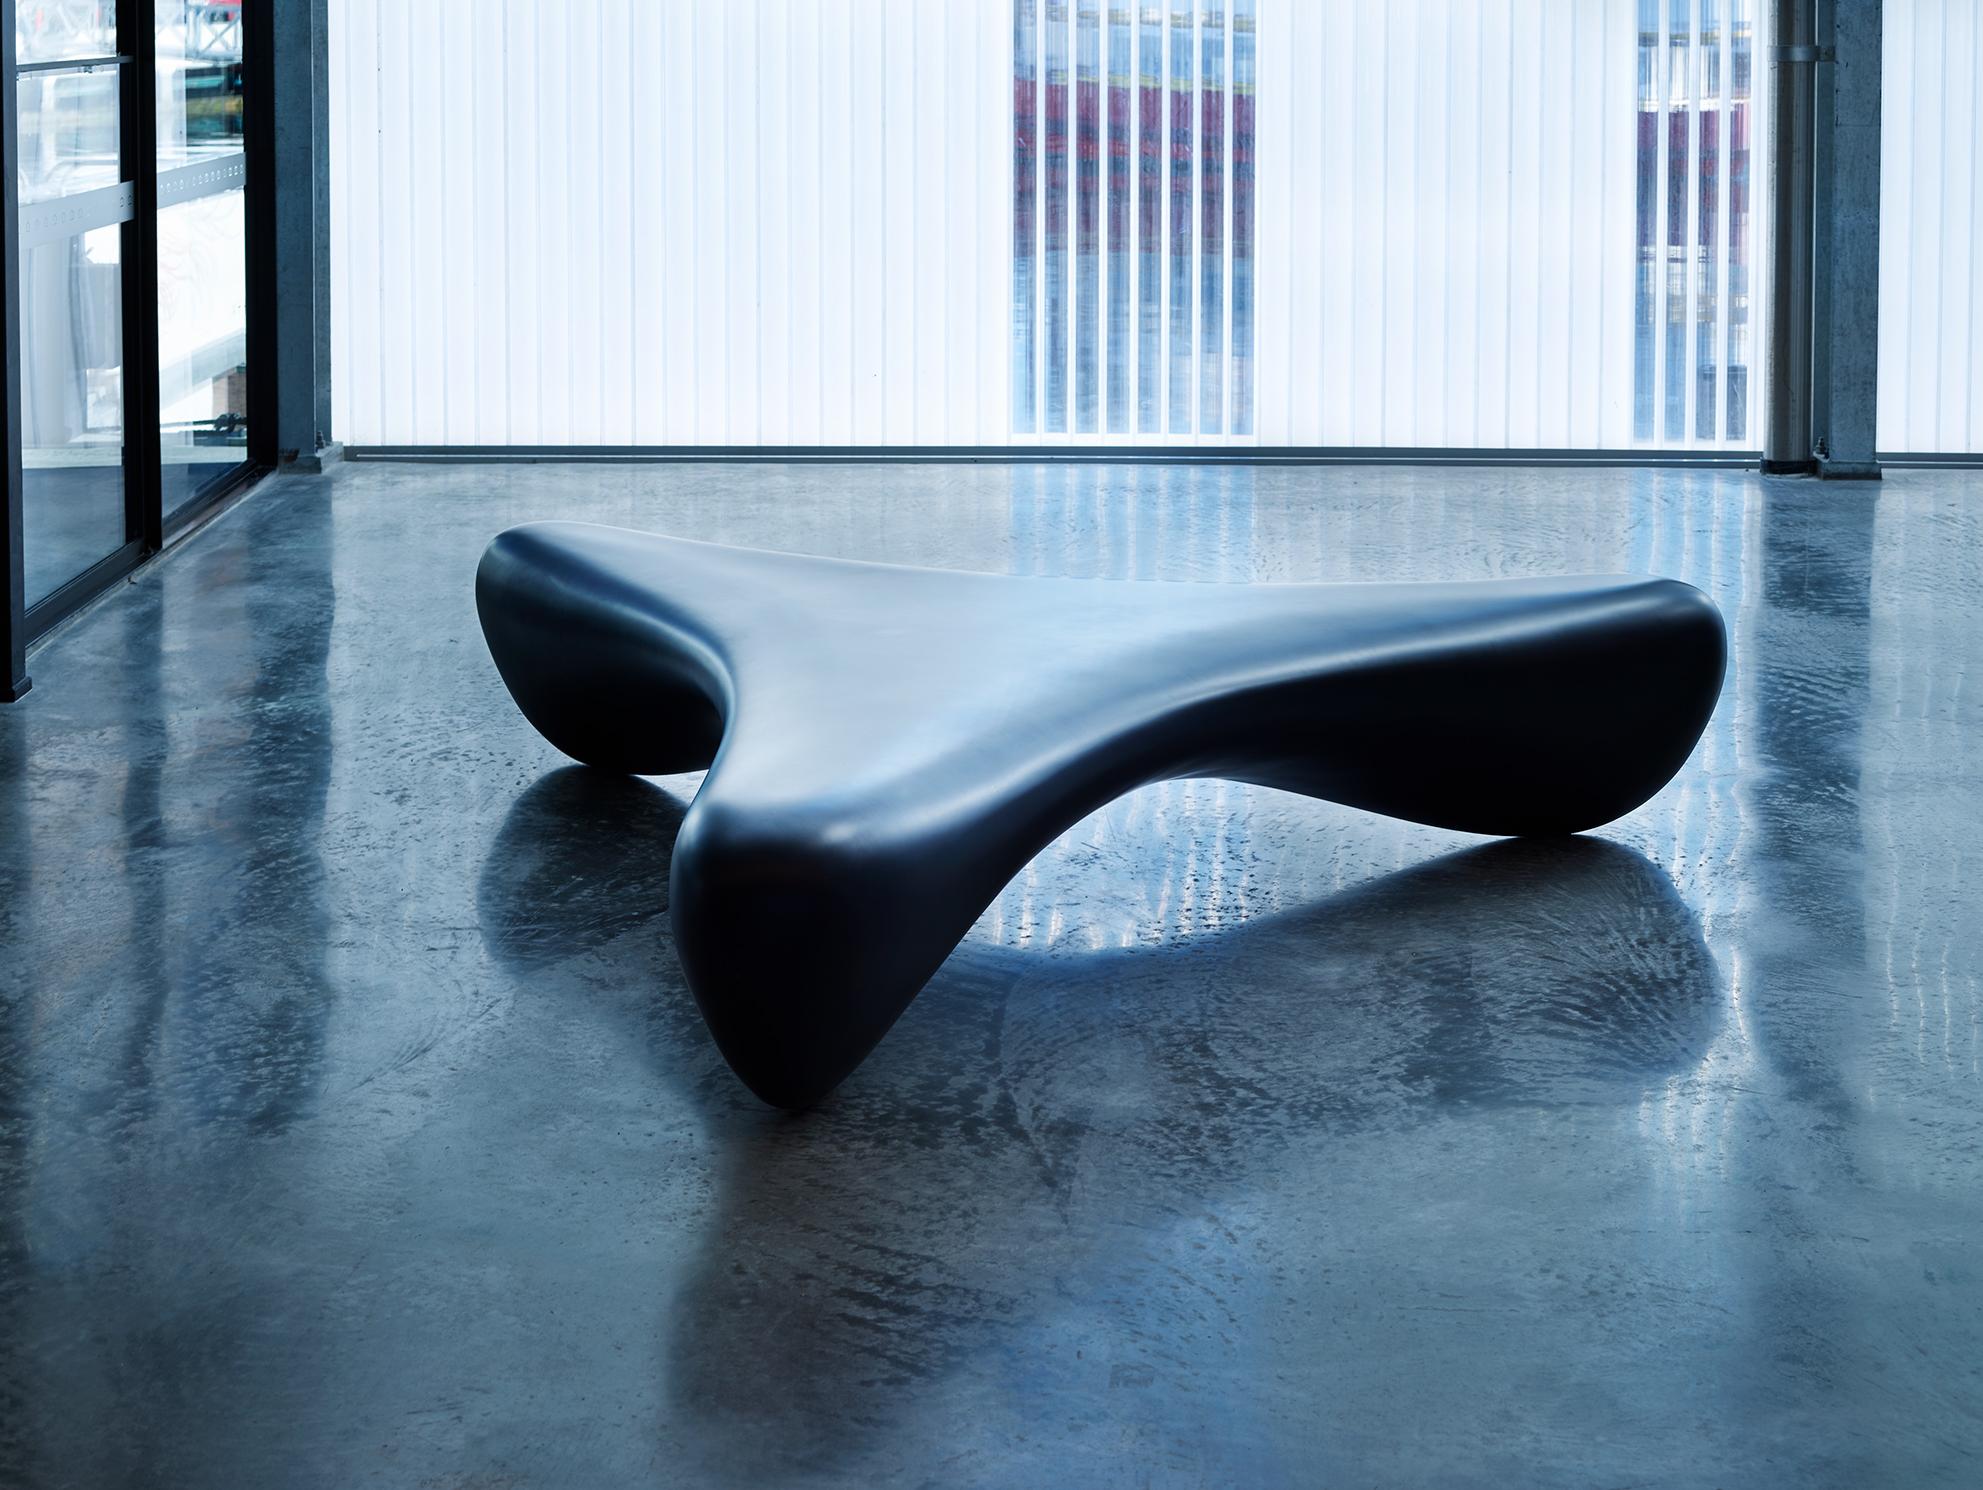 With a long, undulating three-way symmetry, the organic wishbone bench seat creates a sculpturally striking form which is reminiscent of a whale-bone. Available in black and white as standard with custom colors available on request, the Wishbone can